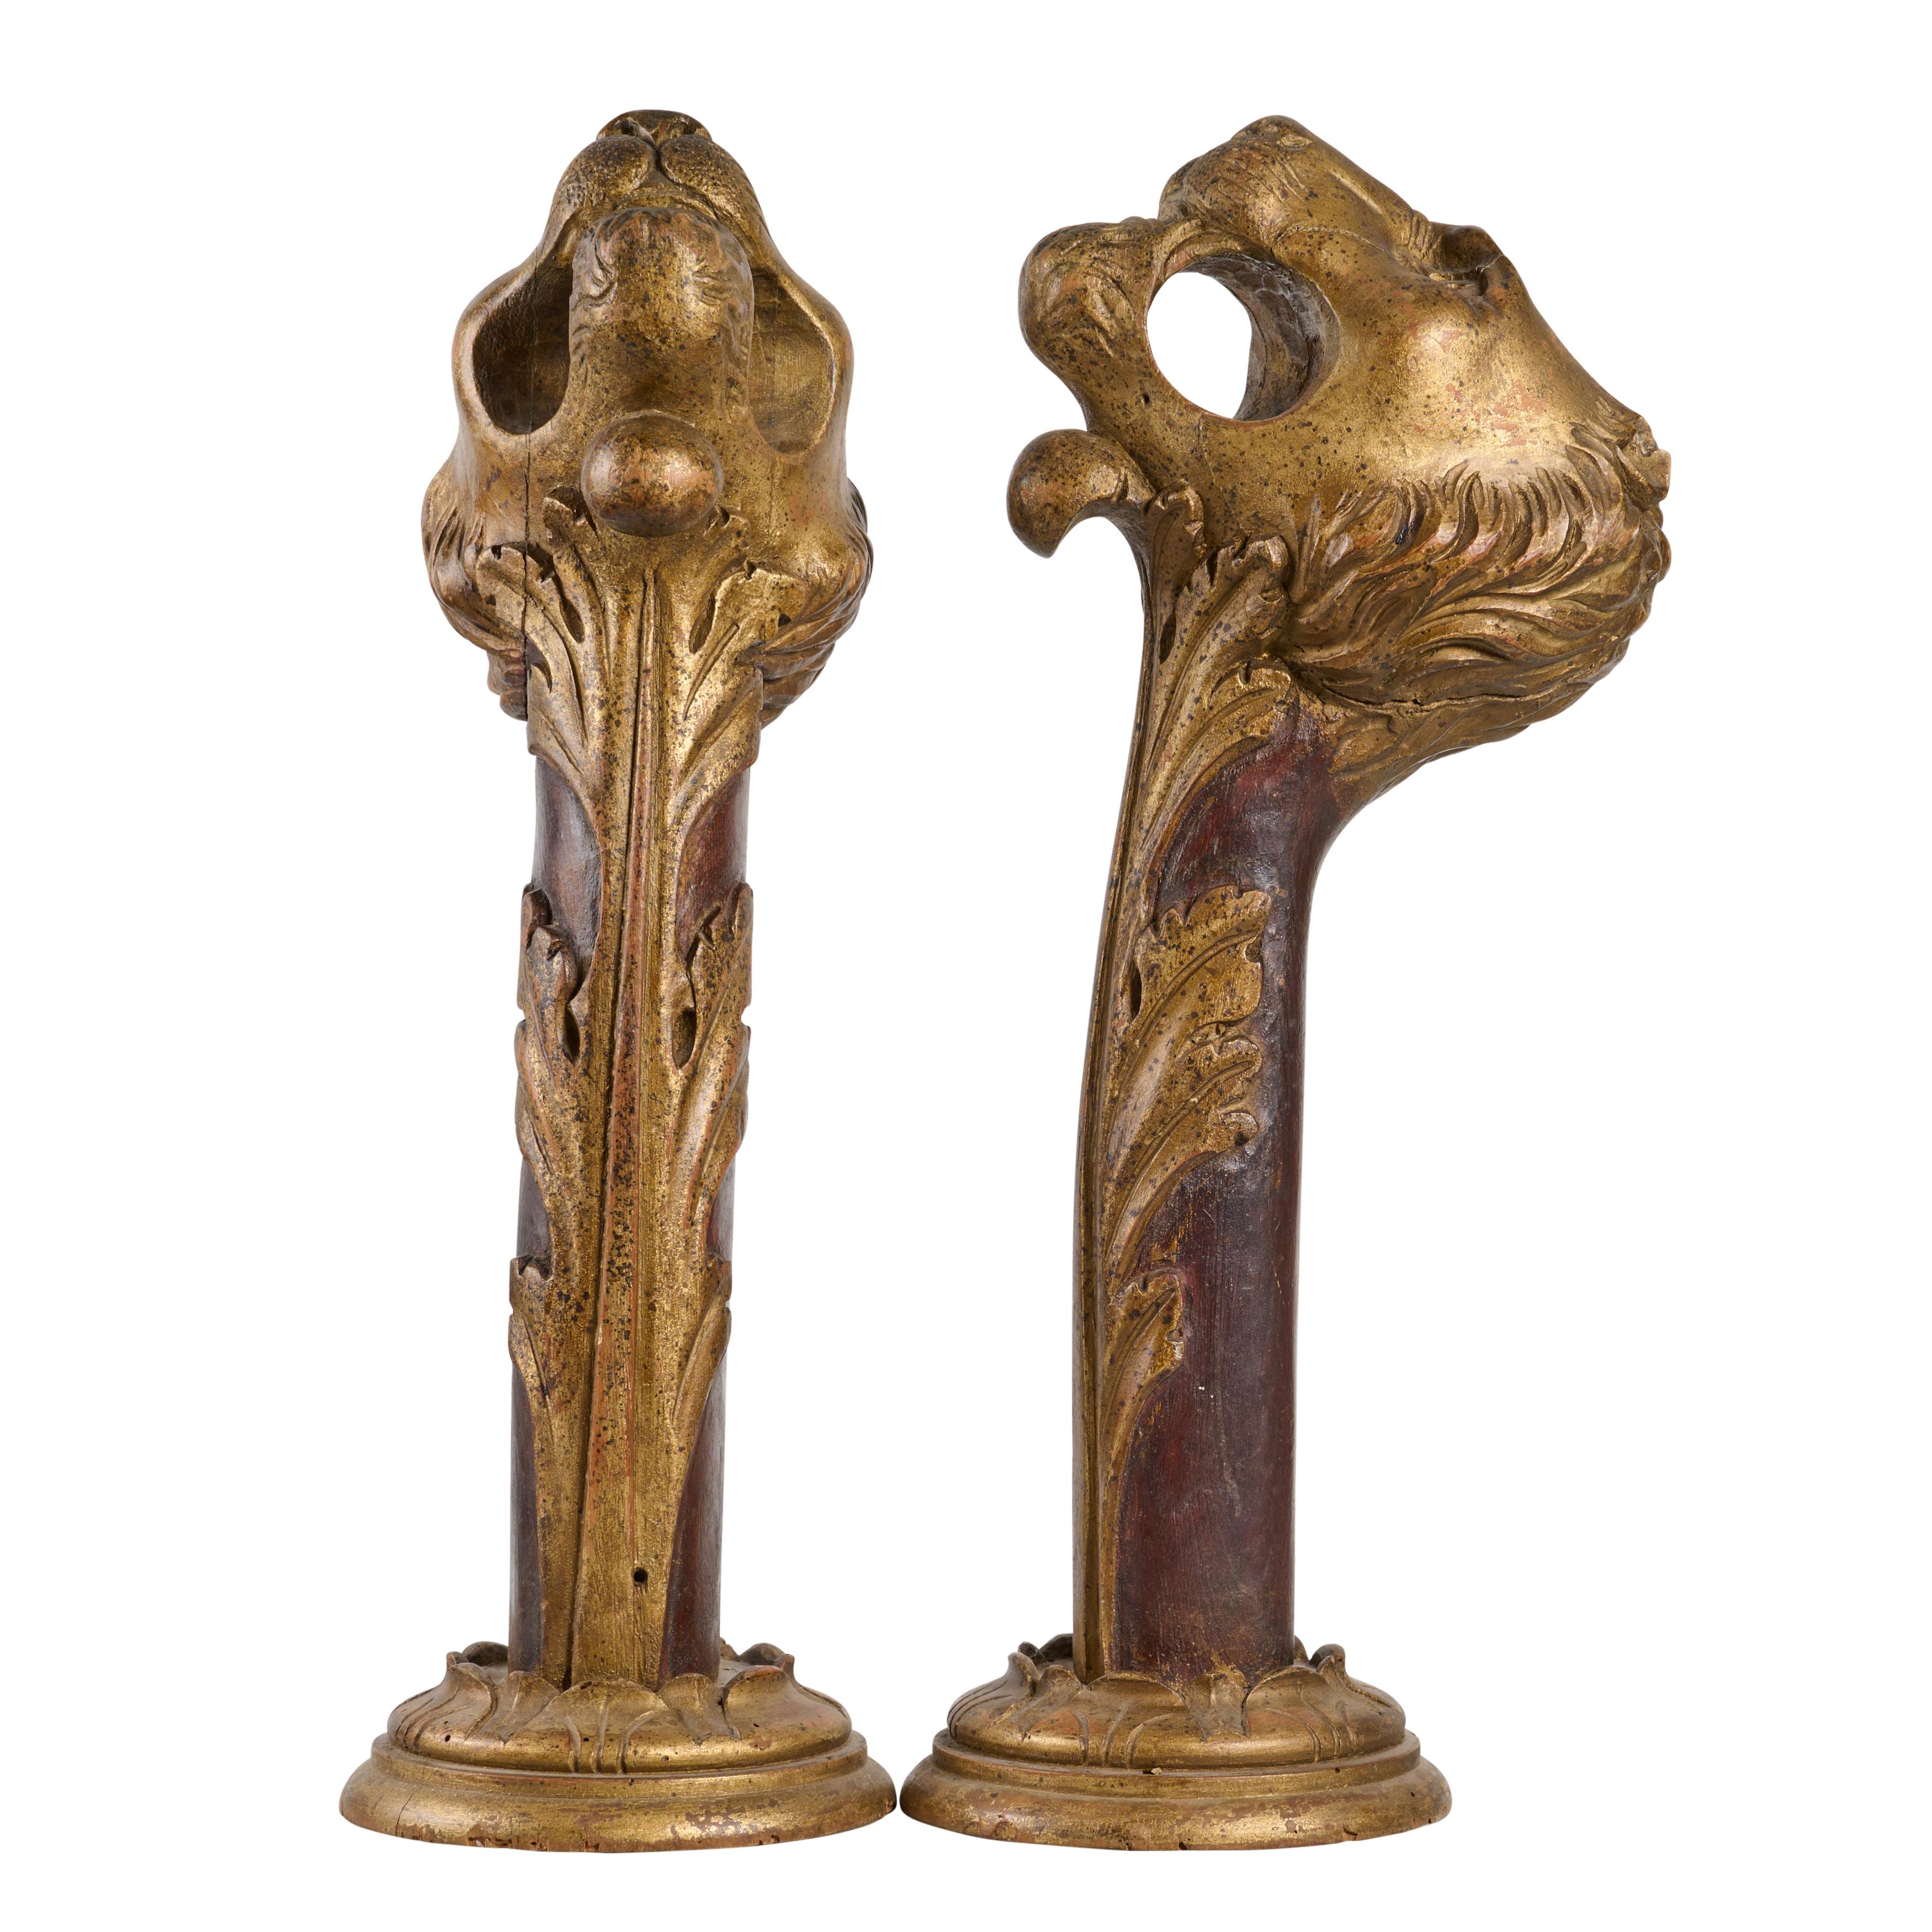 Pair of carved lion head curtain rod brackets - excellent patina. 